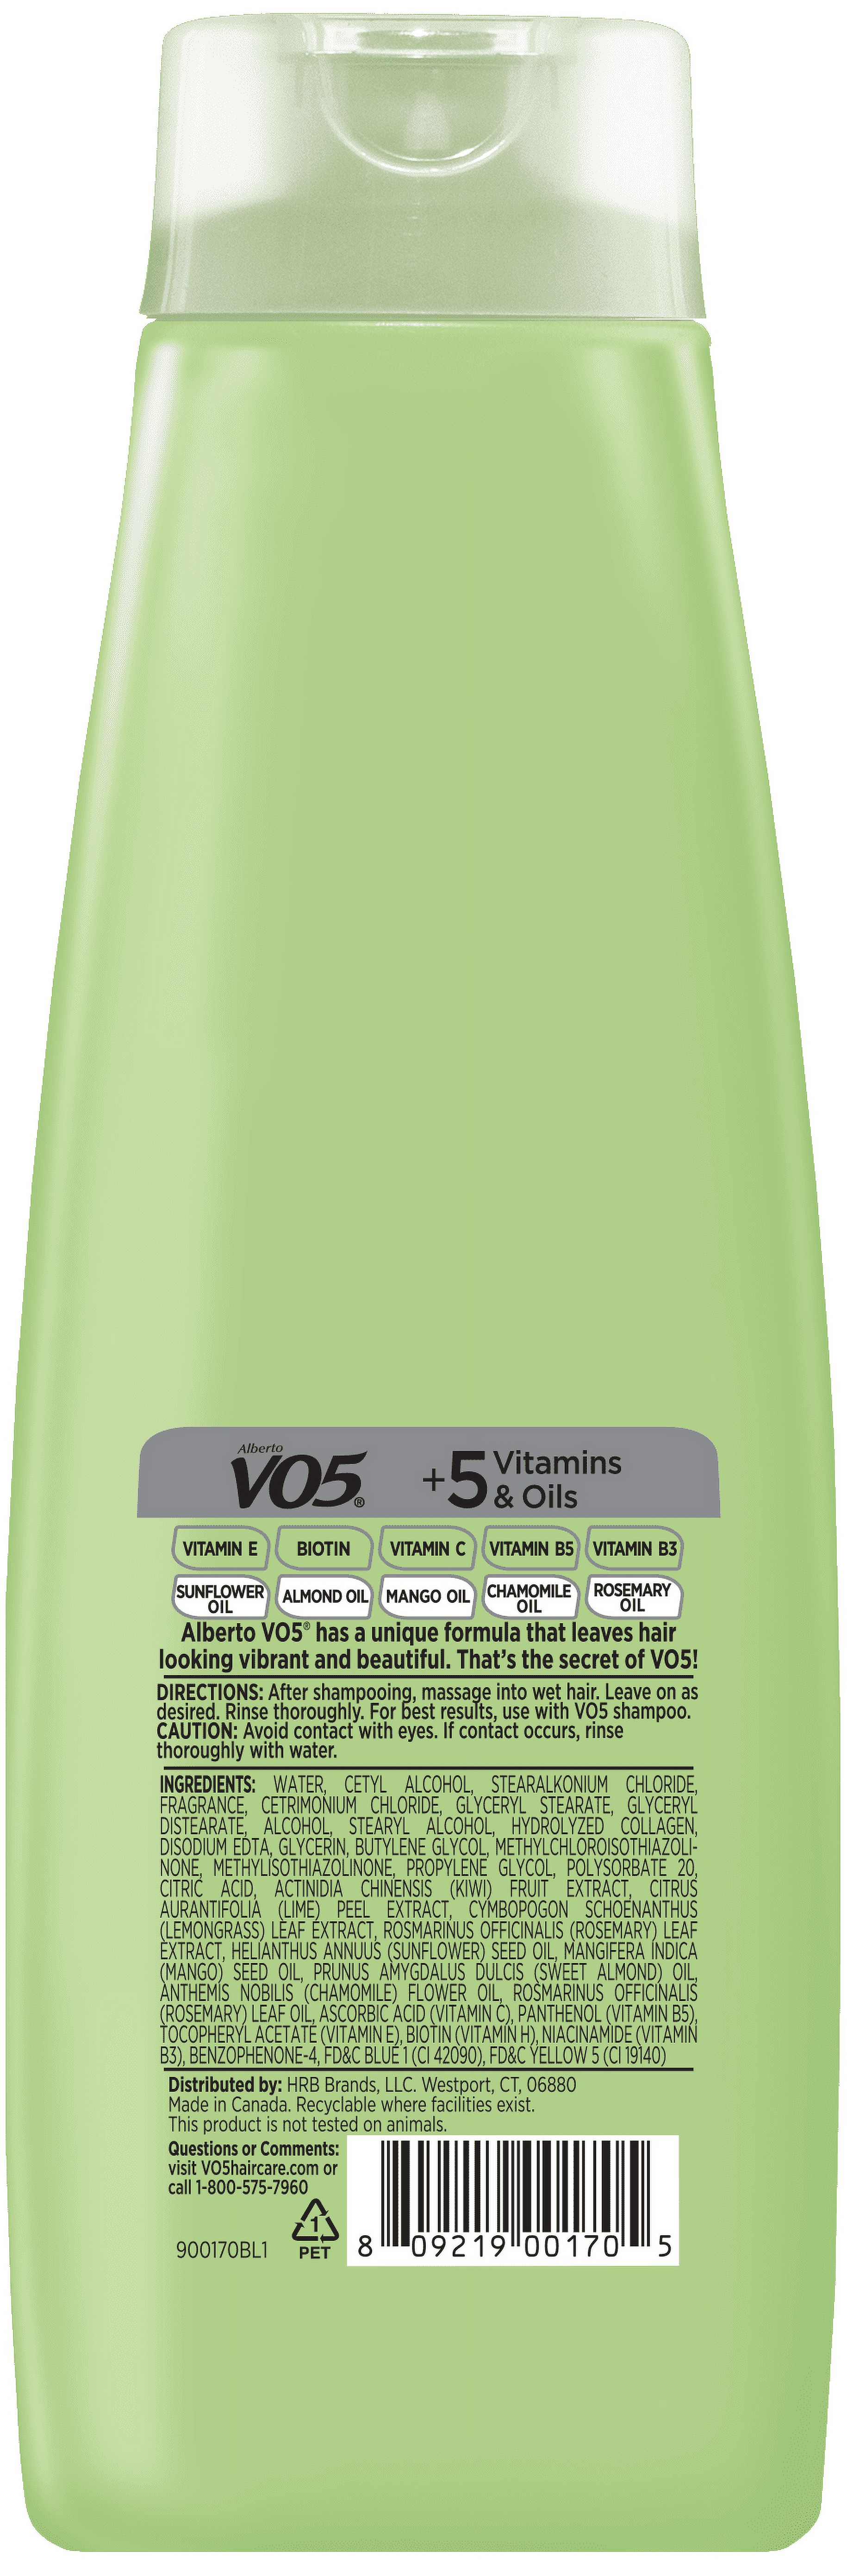 Alberto VO5 Kiwi Lime Squeeze Conditioner with Vitamin E & C, for All Hair Types, 16.9 fl oz - image 2 of 6